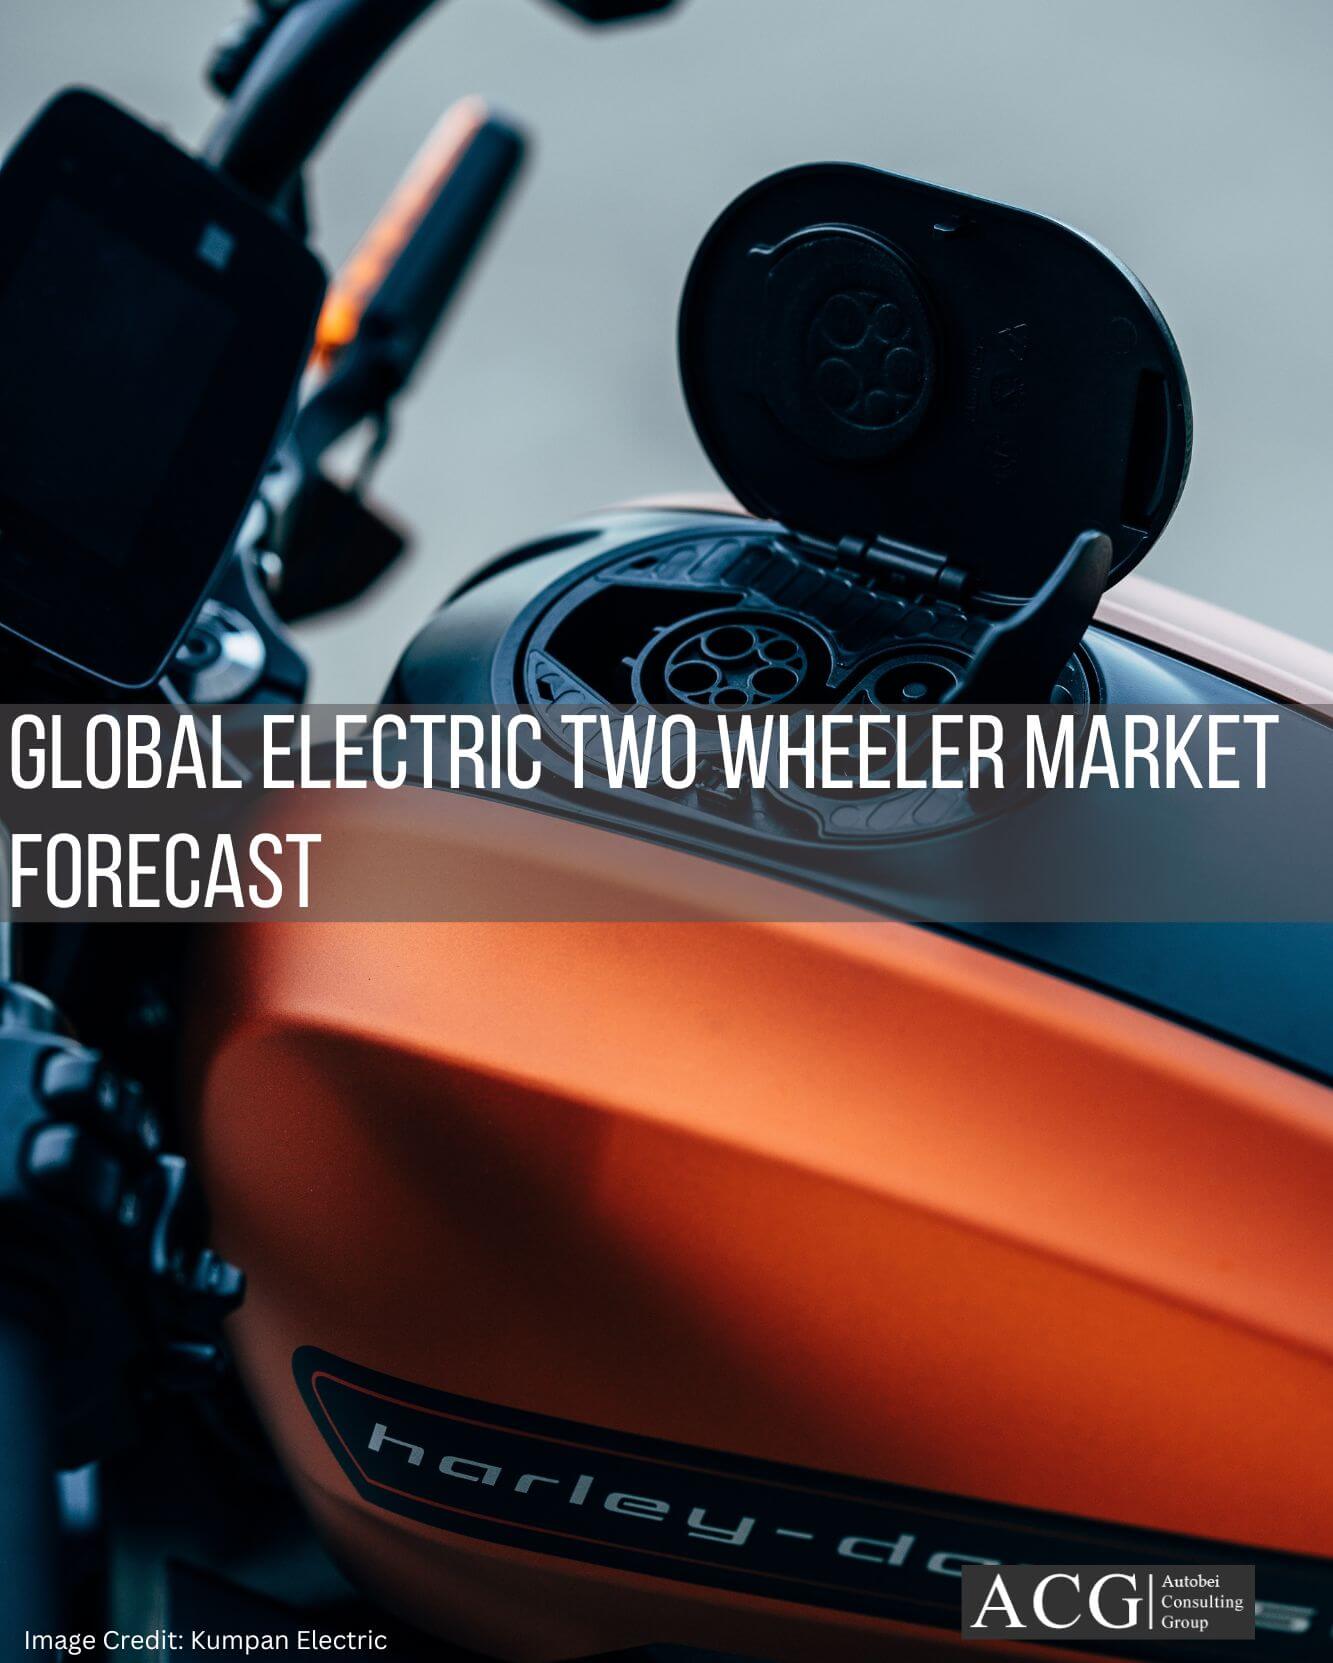 Global Electric Two Wheeler Market Forecast